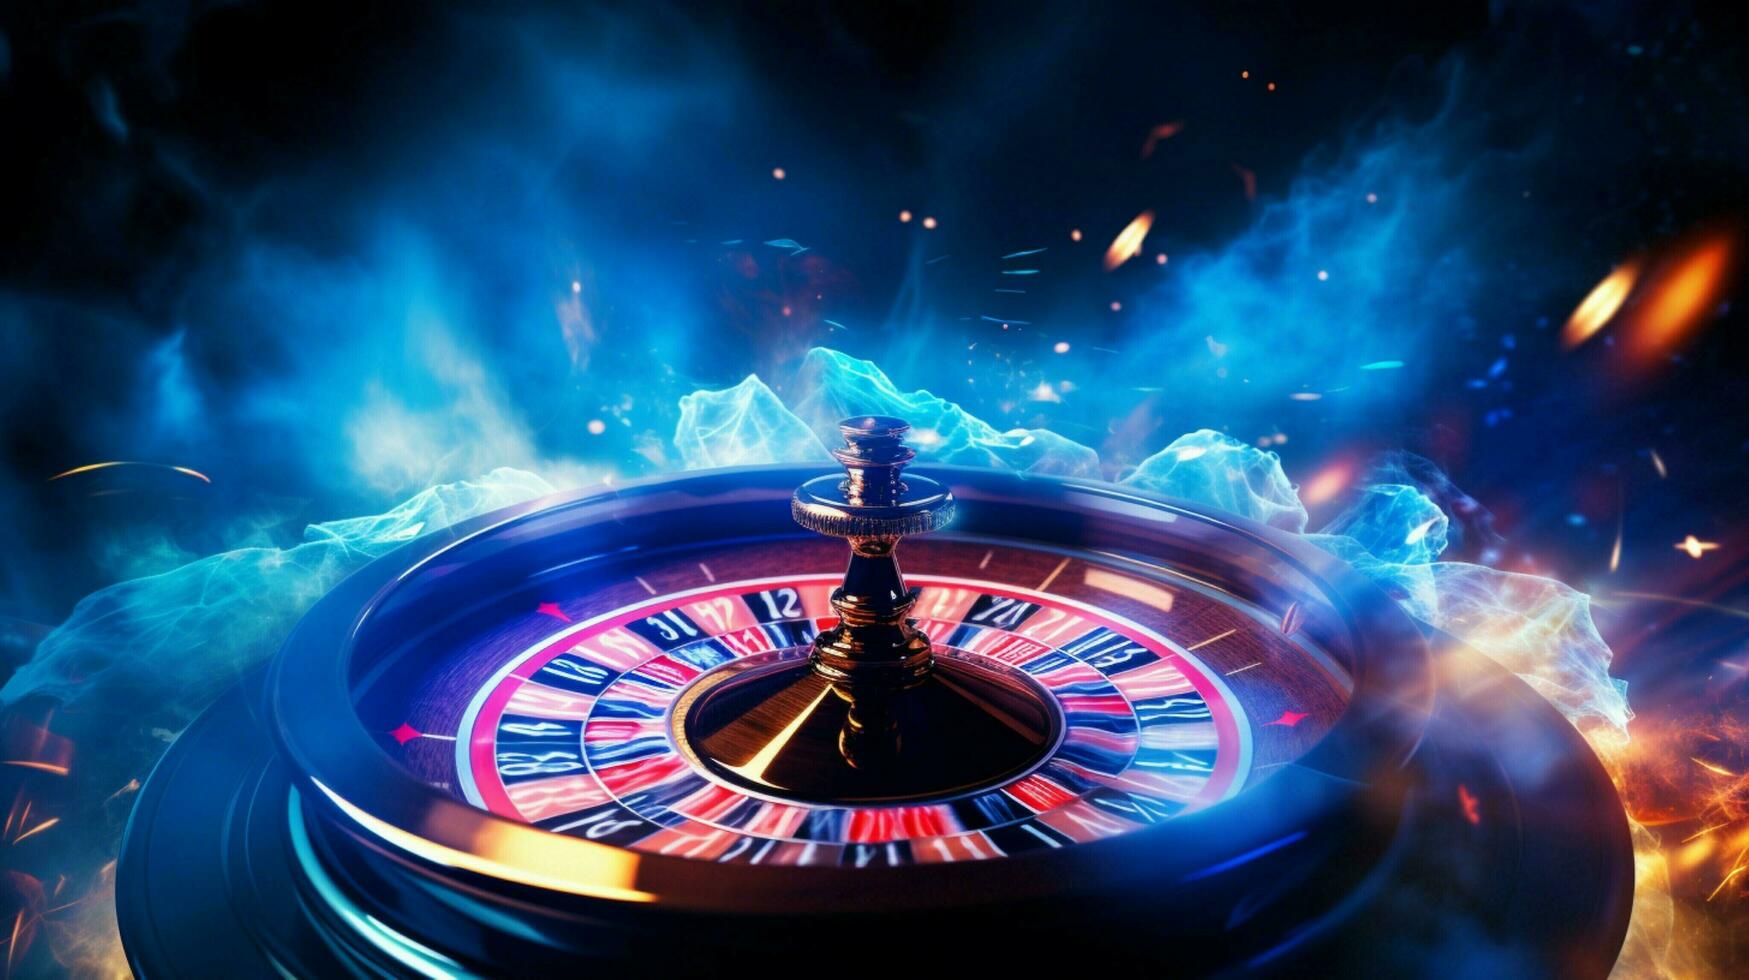 filage roulette roue bleu flamme cagnotte casino ultime photo